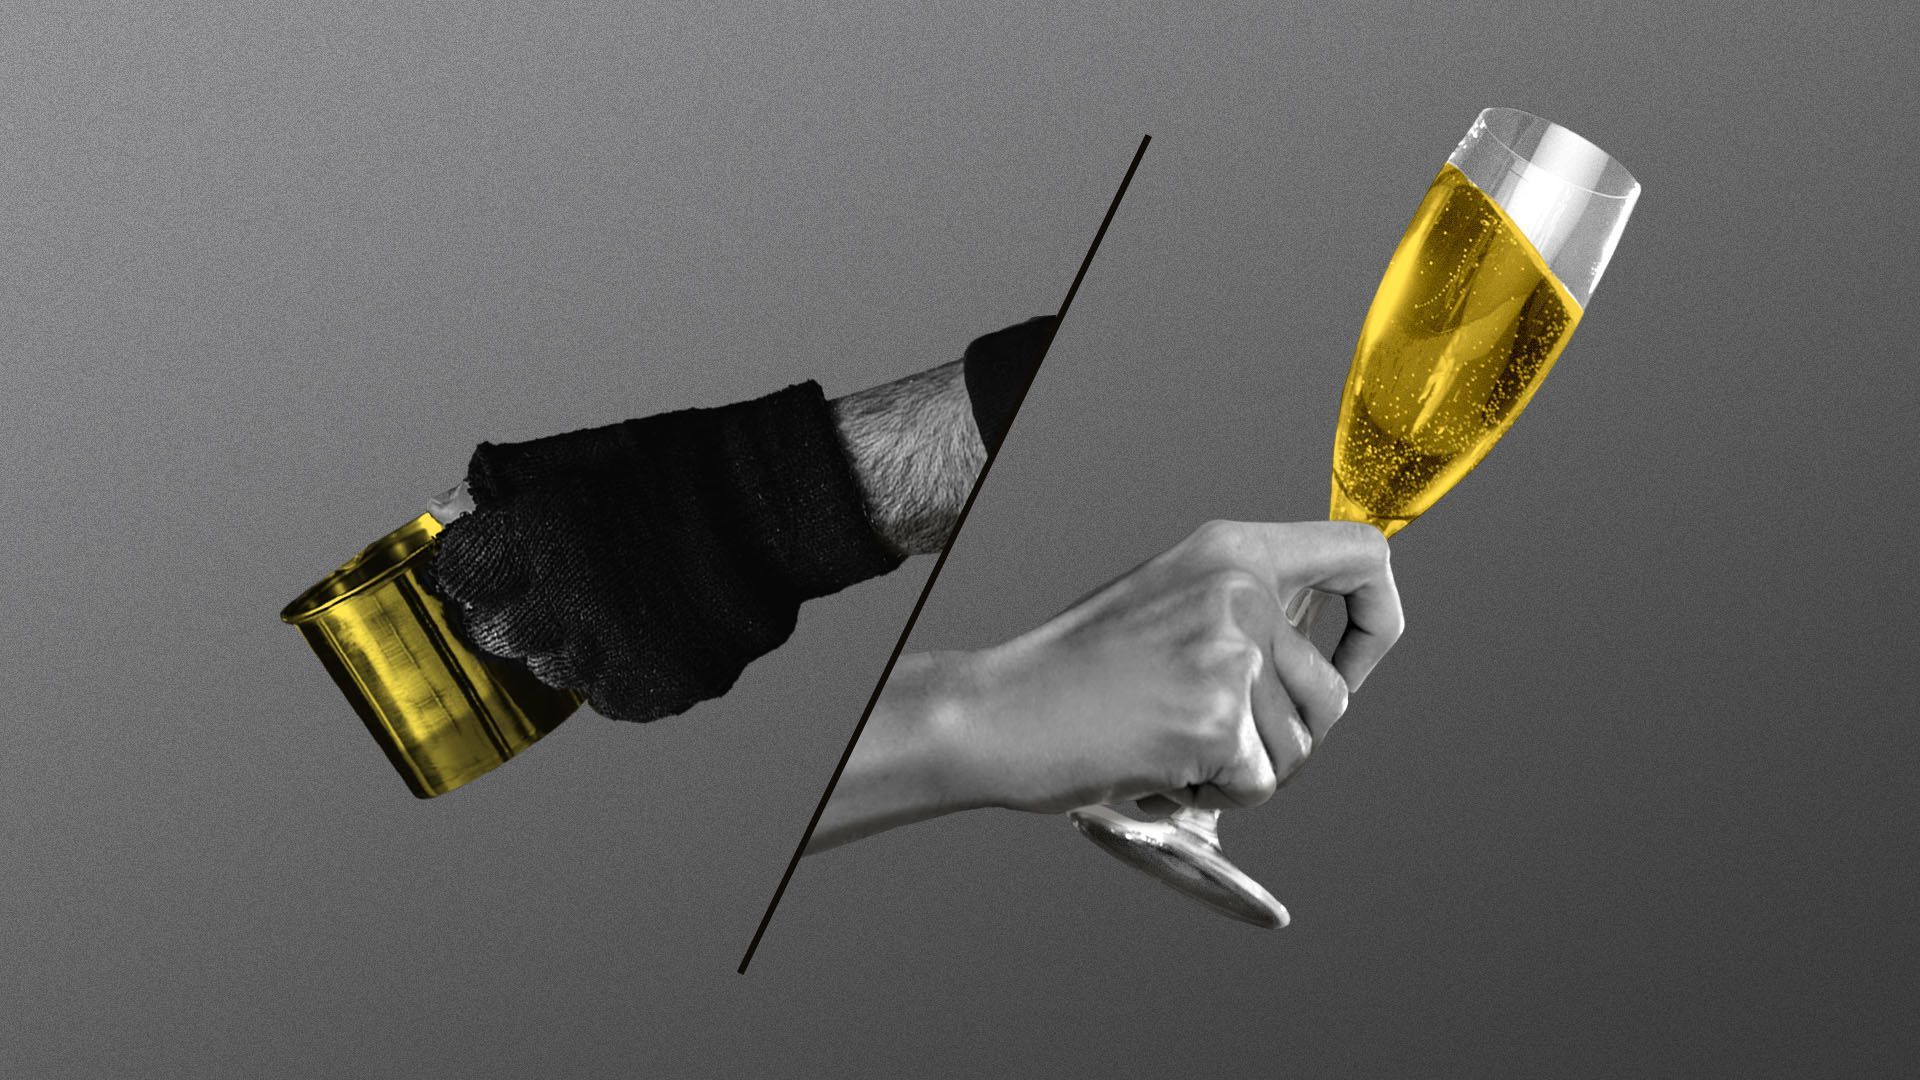 Illustration of a hand holding a glass of champaign and another with a cup panhandling.